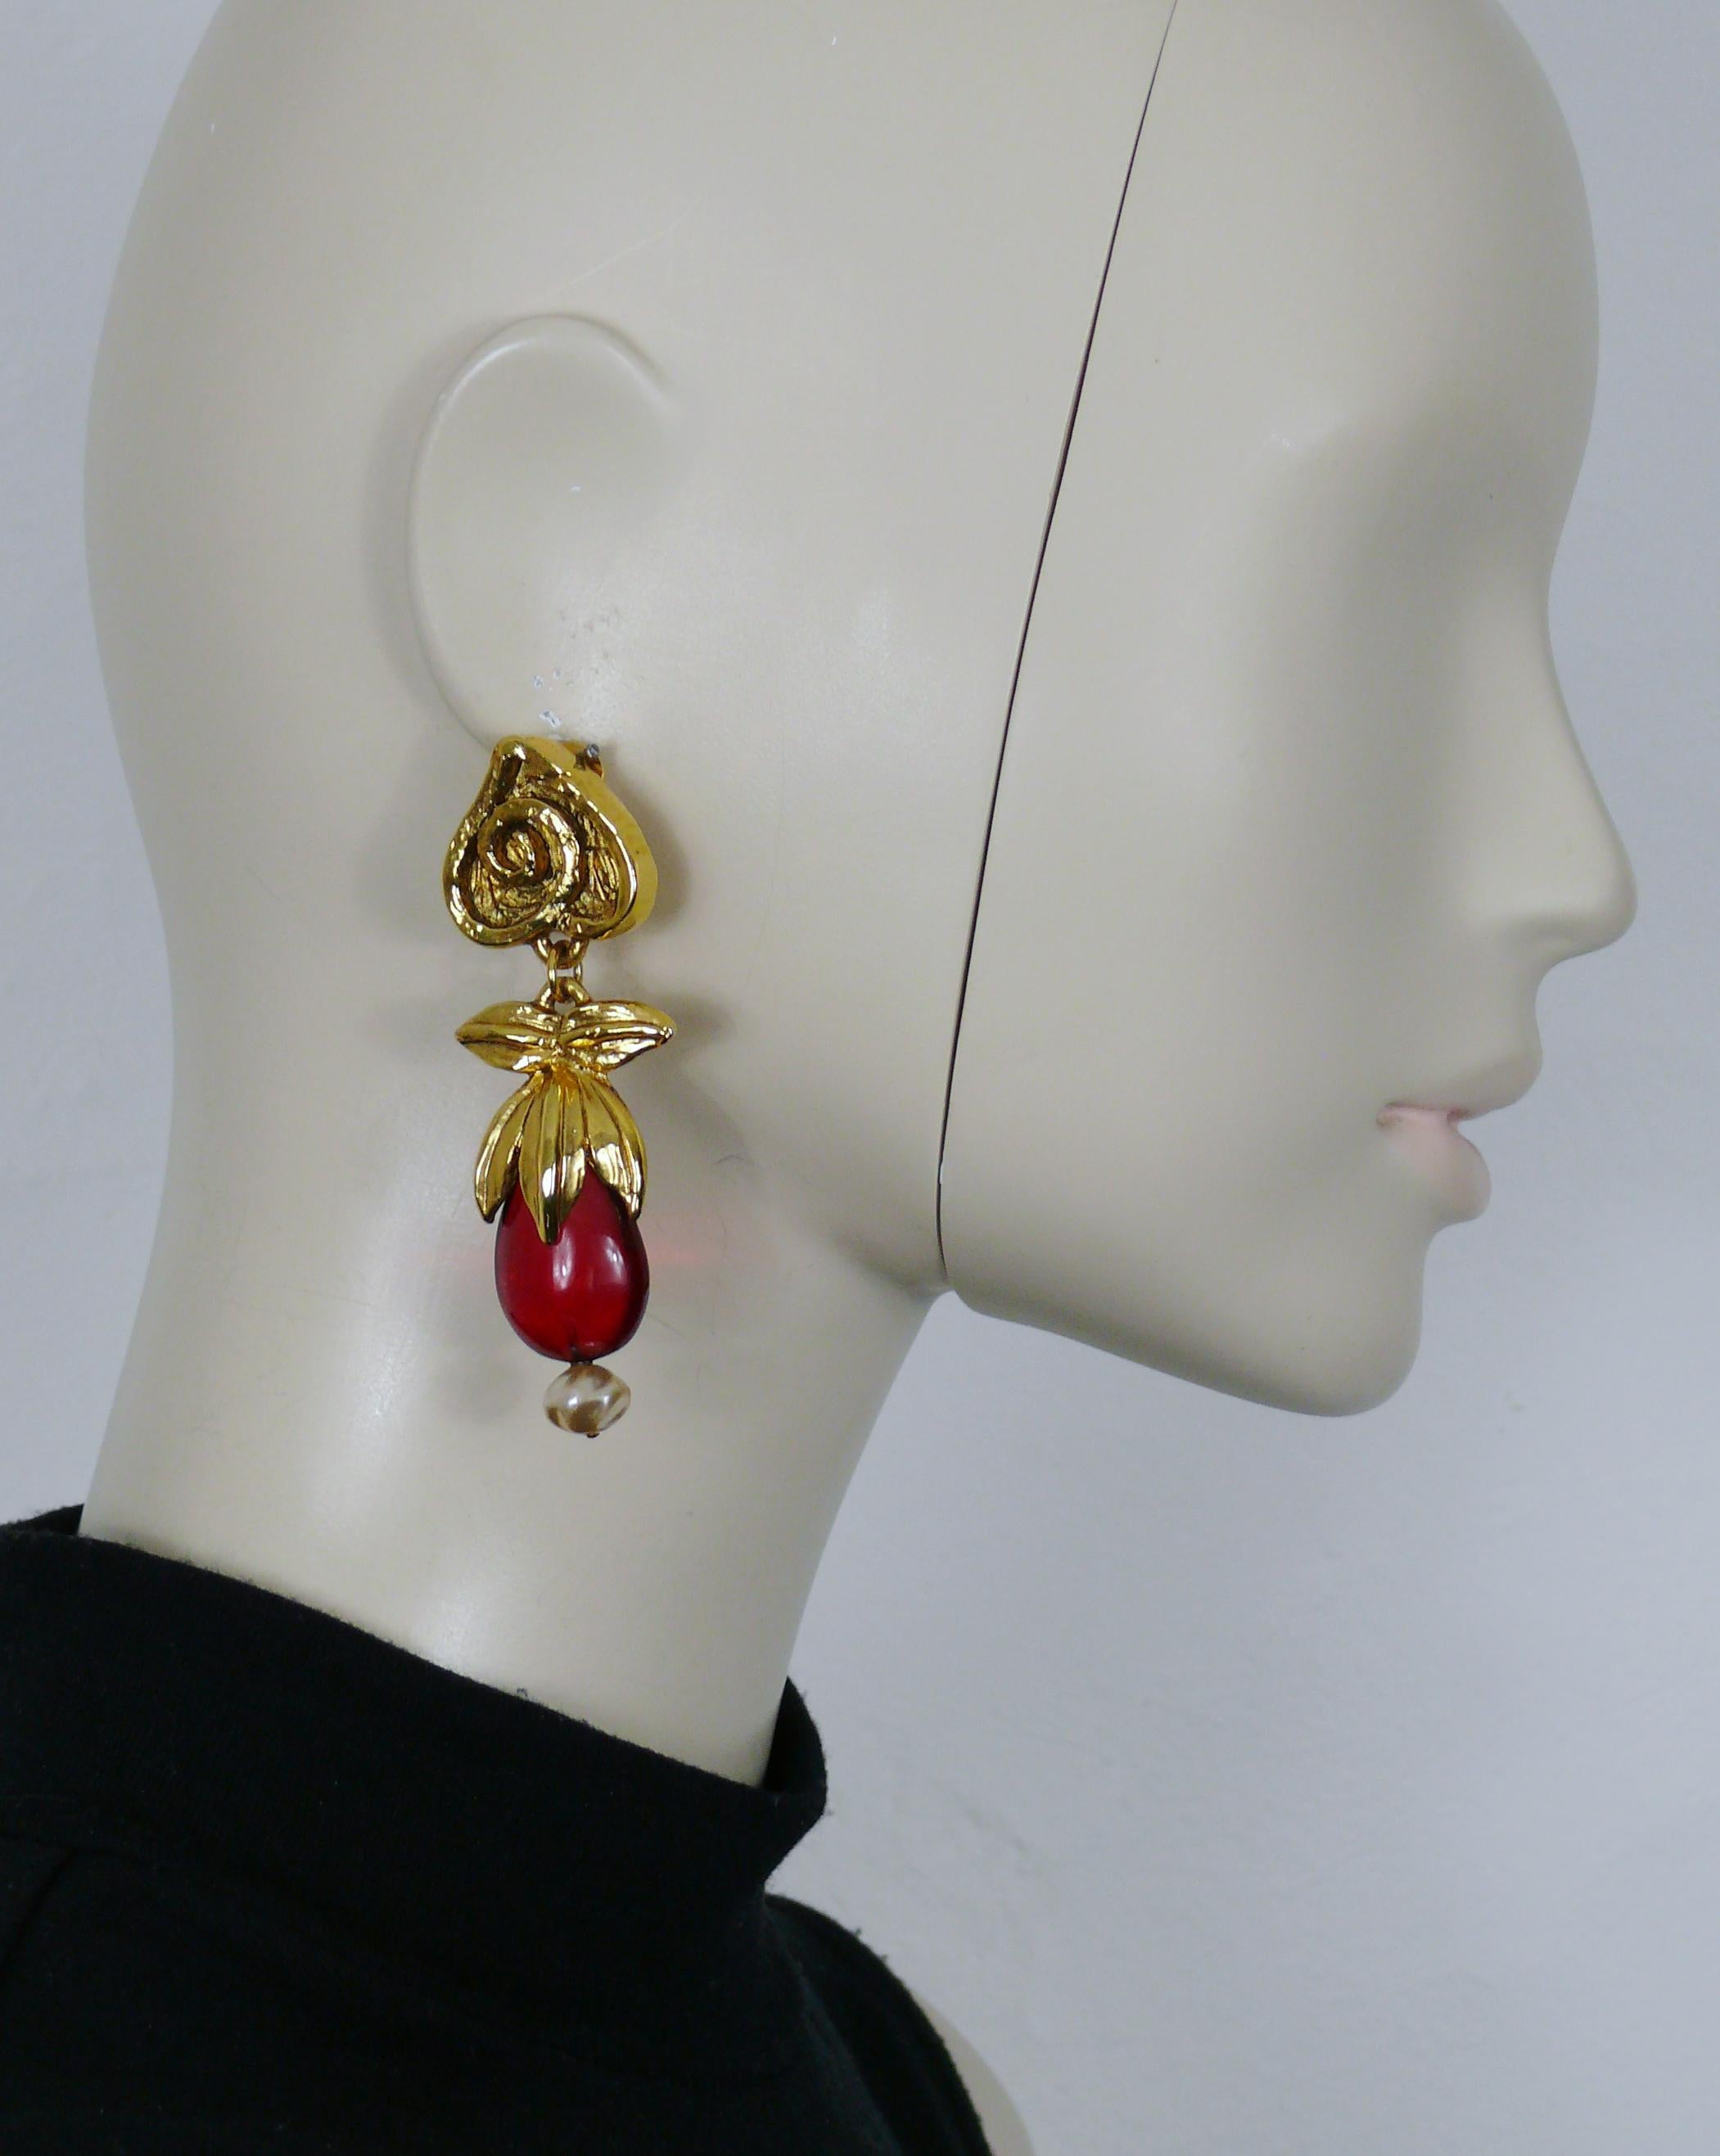 RENA LANGE vintage gold tone resin dangling earrings (clip-on) featuring a red resin drop and faux pearl.

Marked RENA LANGE Made in France. 

Indicative measurements : height approx. 7.6 cm (2.99 inches) / max. width approx. 2.4 cm (0.94